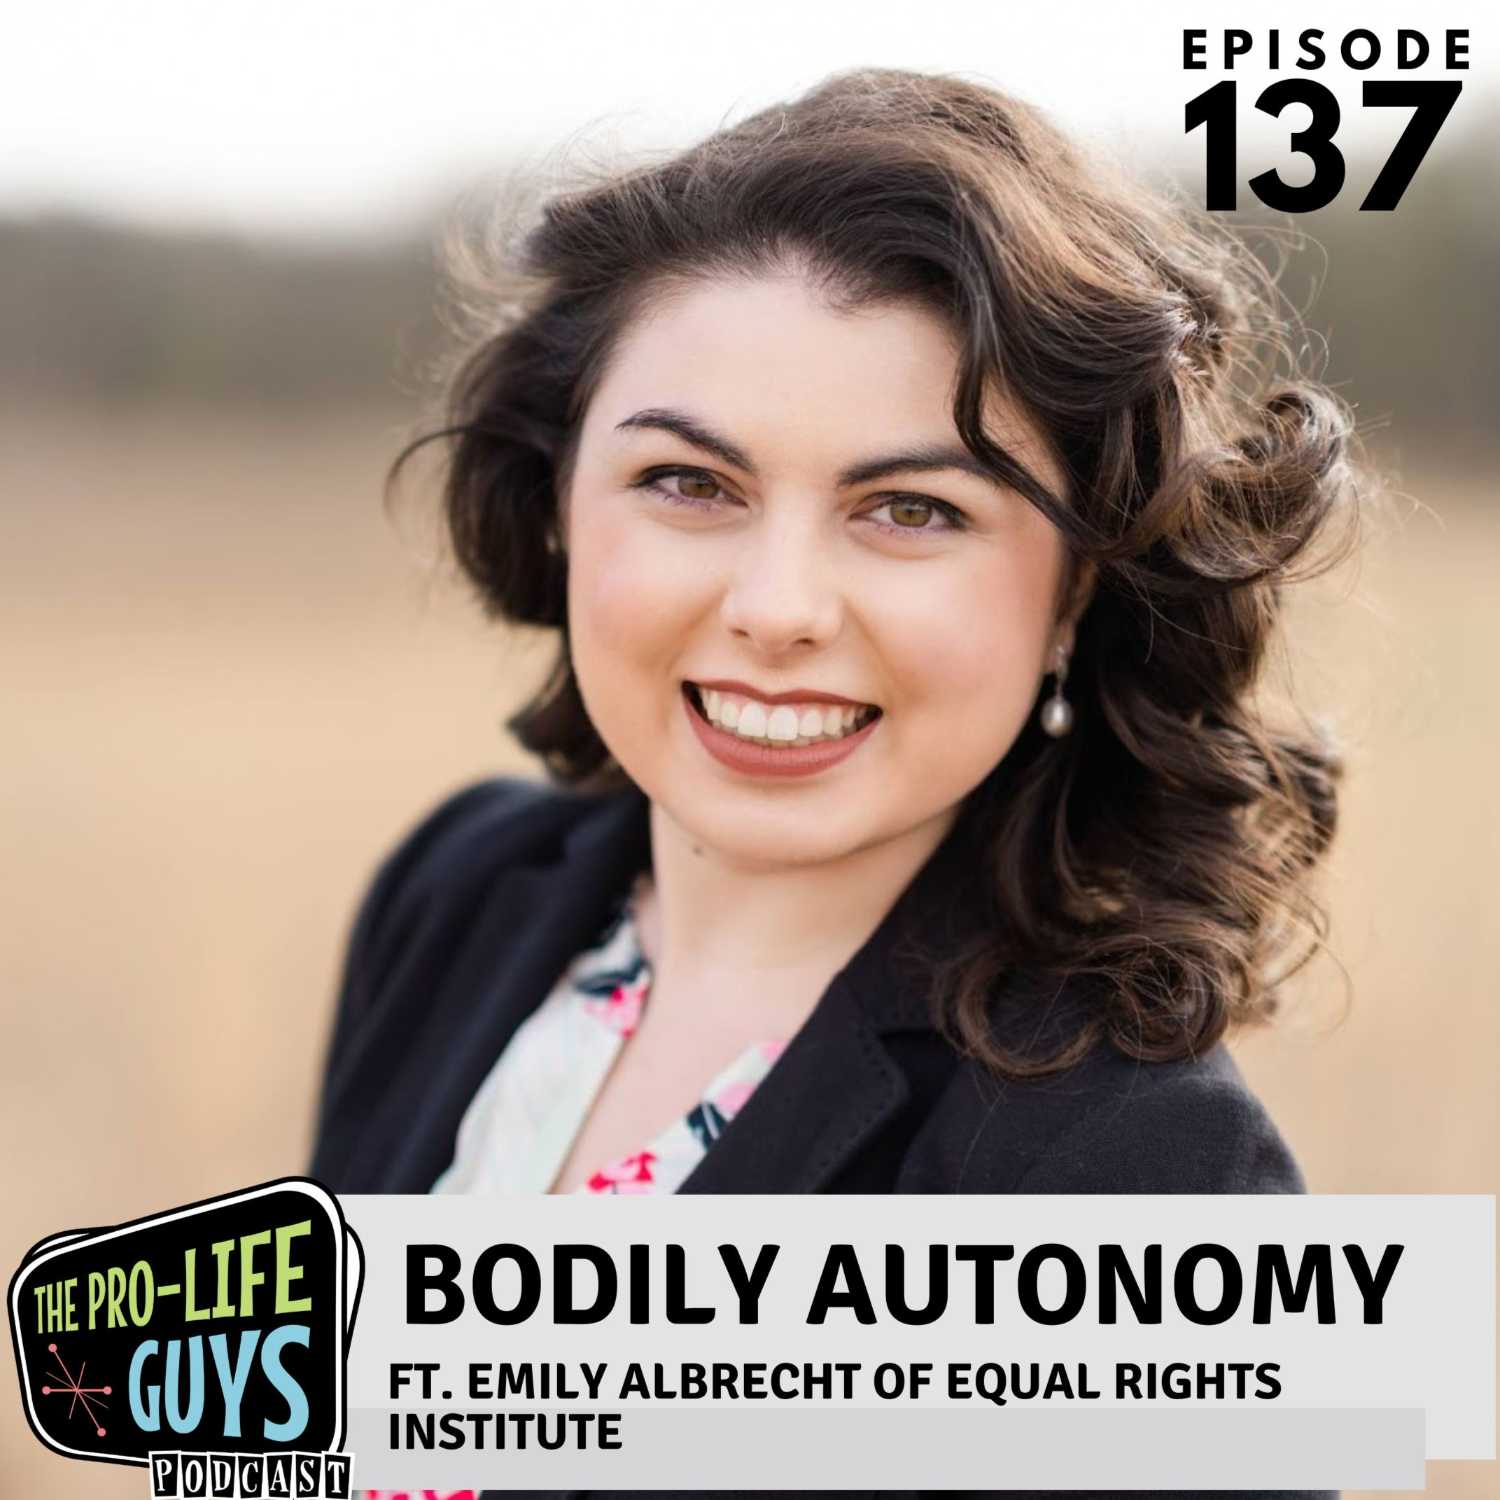 137: Bodily Autonomy | ft. Emily Albrecht of Equal Rights Institute